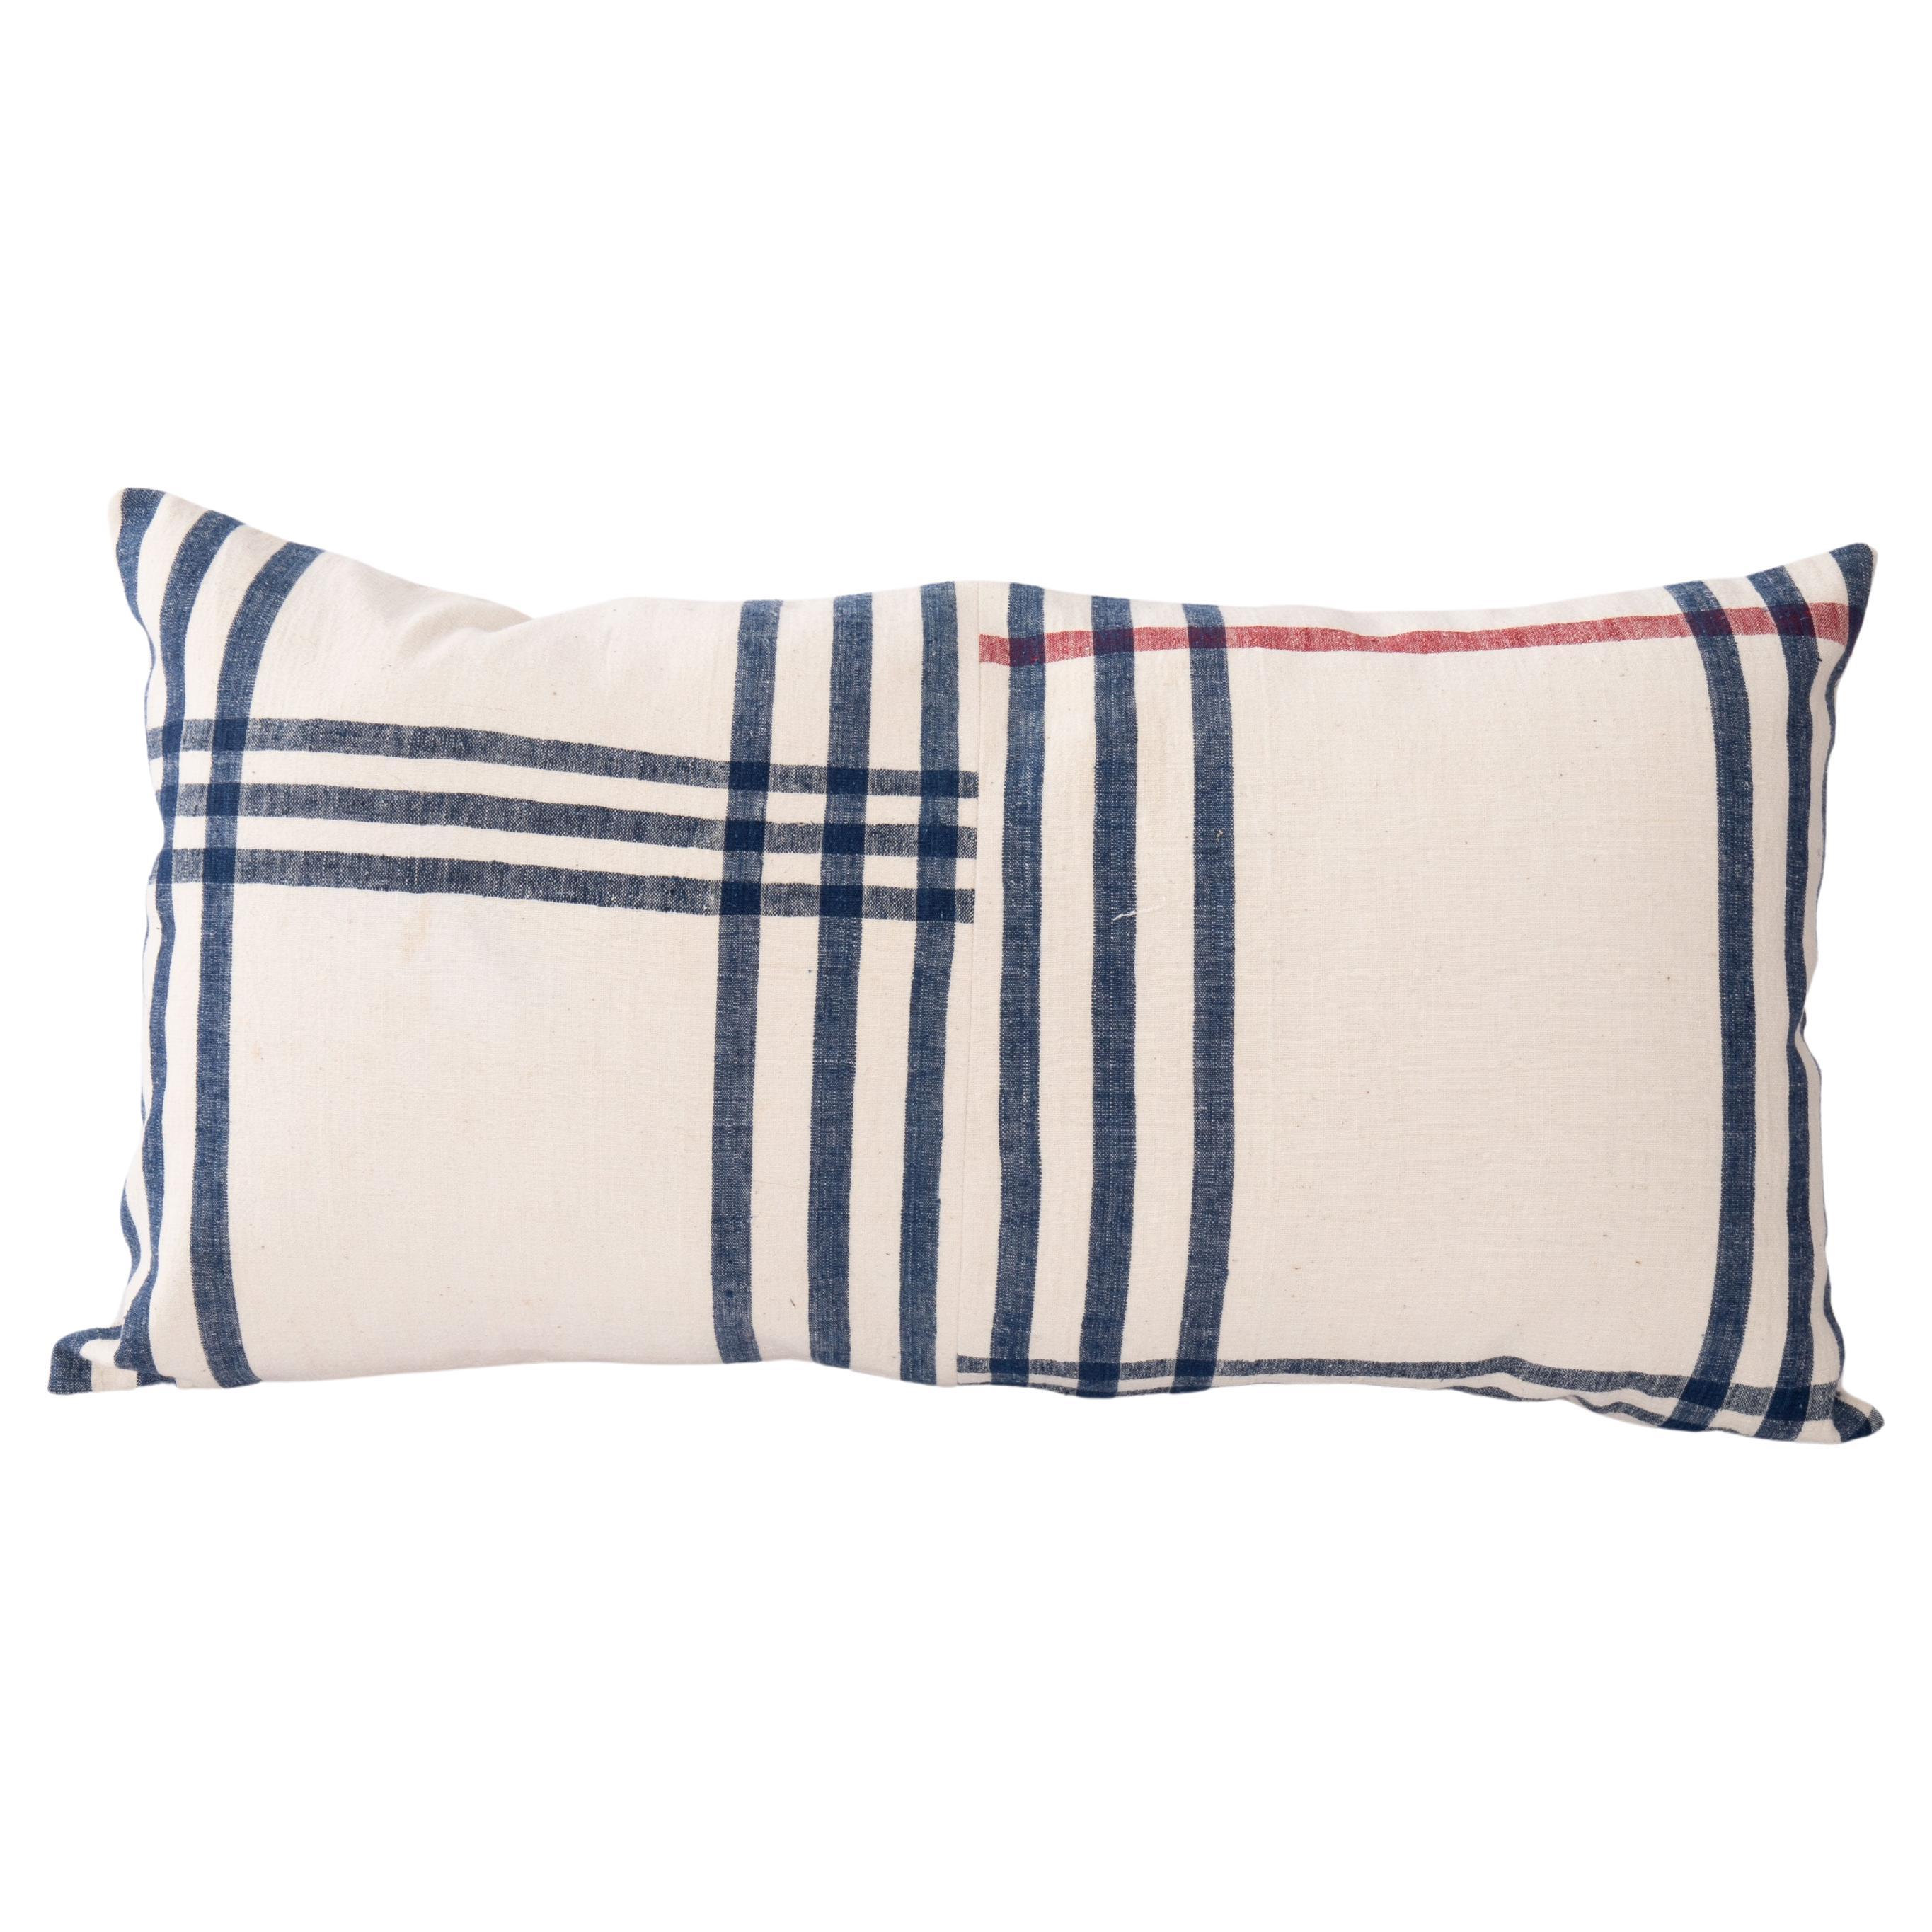 Lumbar Pillow Cover Made from a Vintage Anatolian Cotton Weaving, Mid 20th C. For Sale